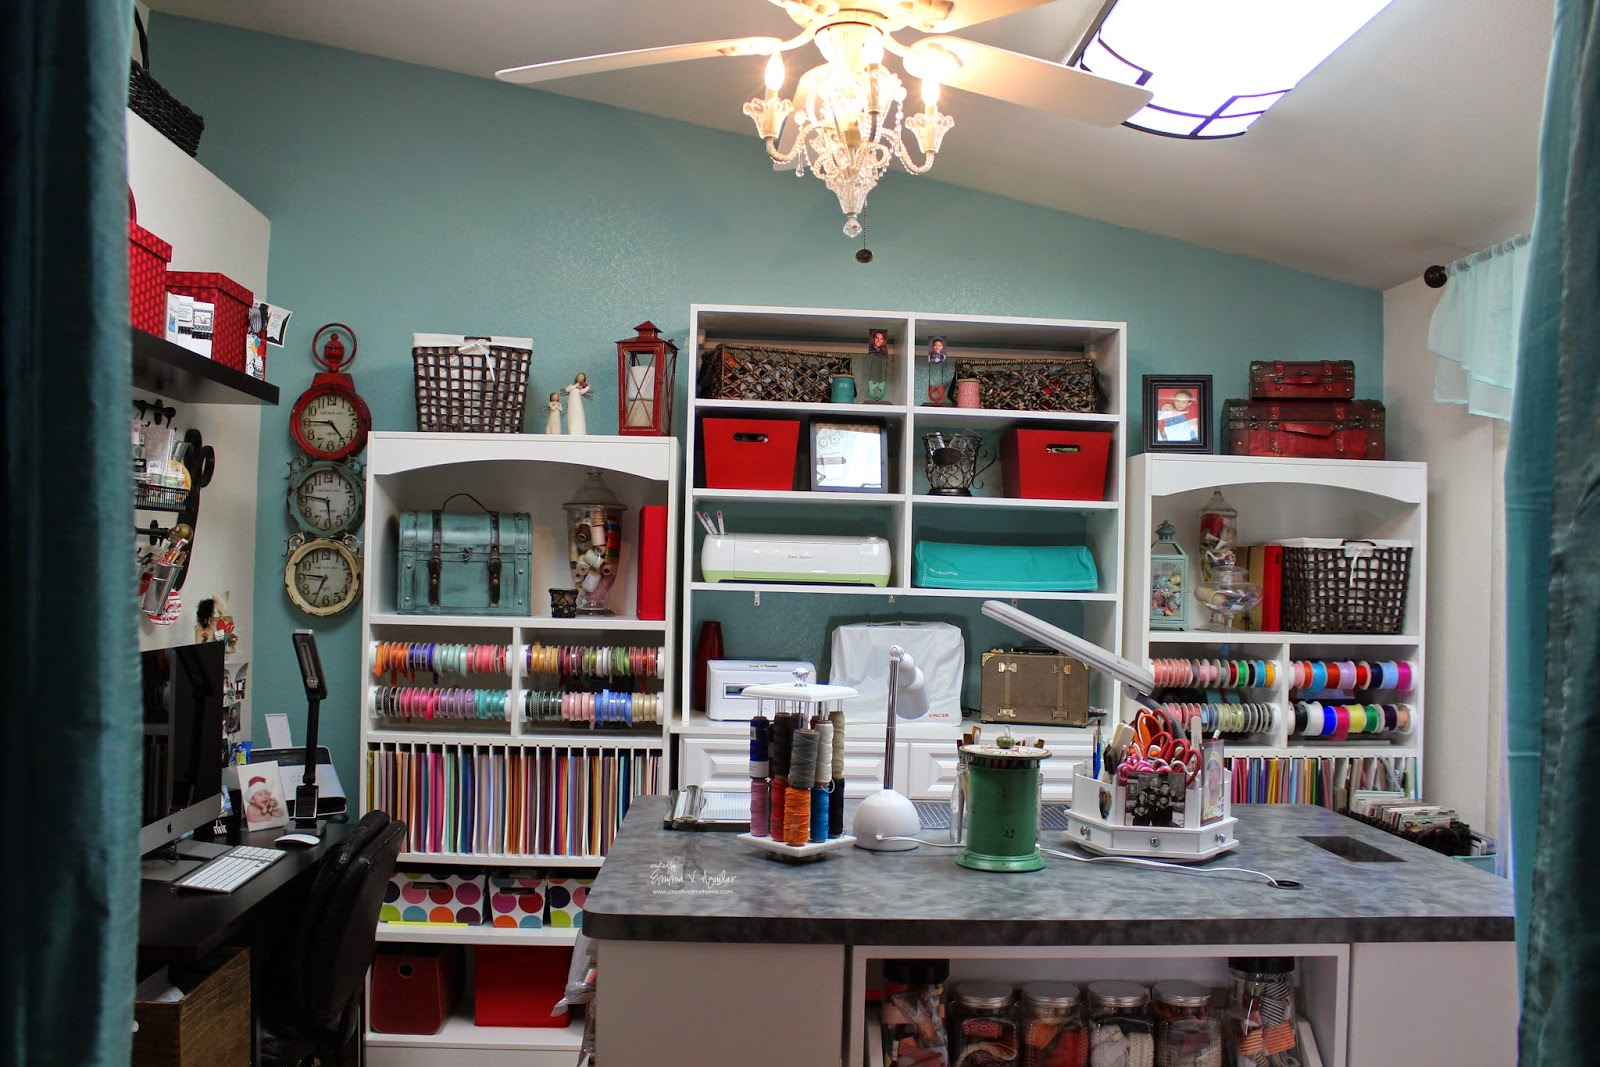 My Creative Time: My Creative Time's Updated 2014 Craftroom!